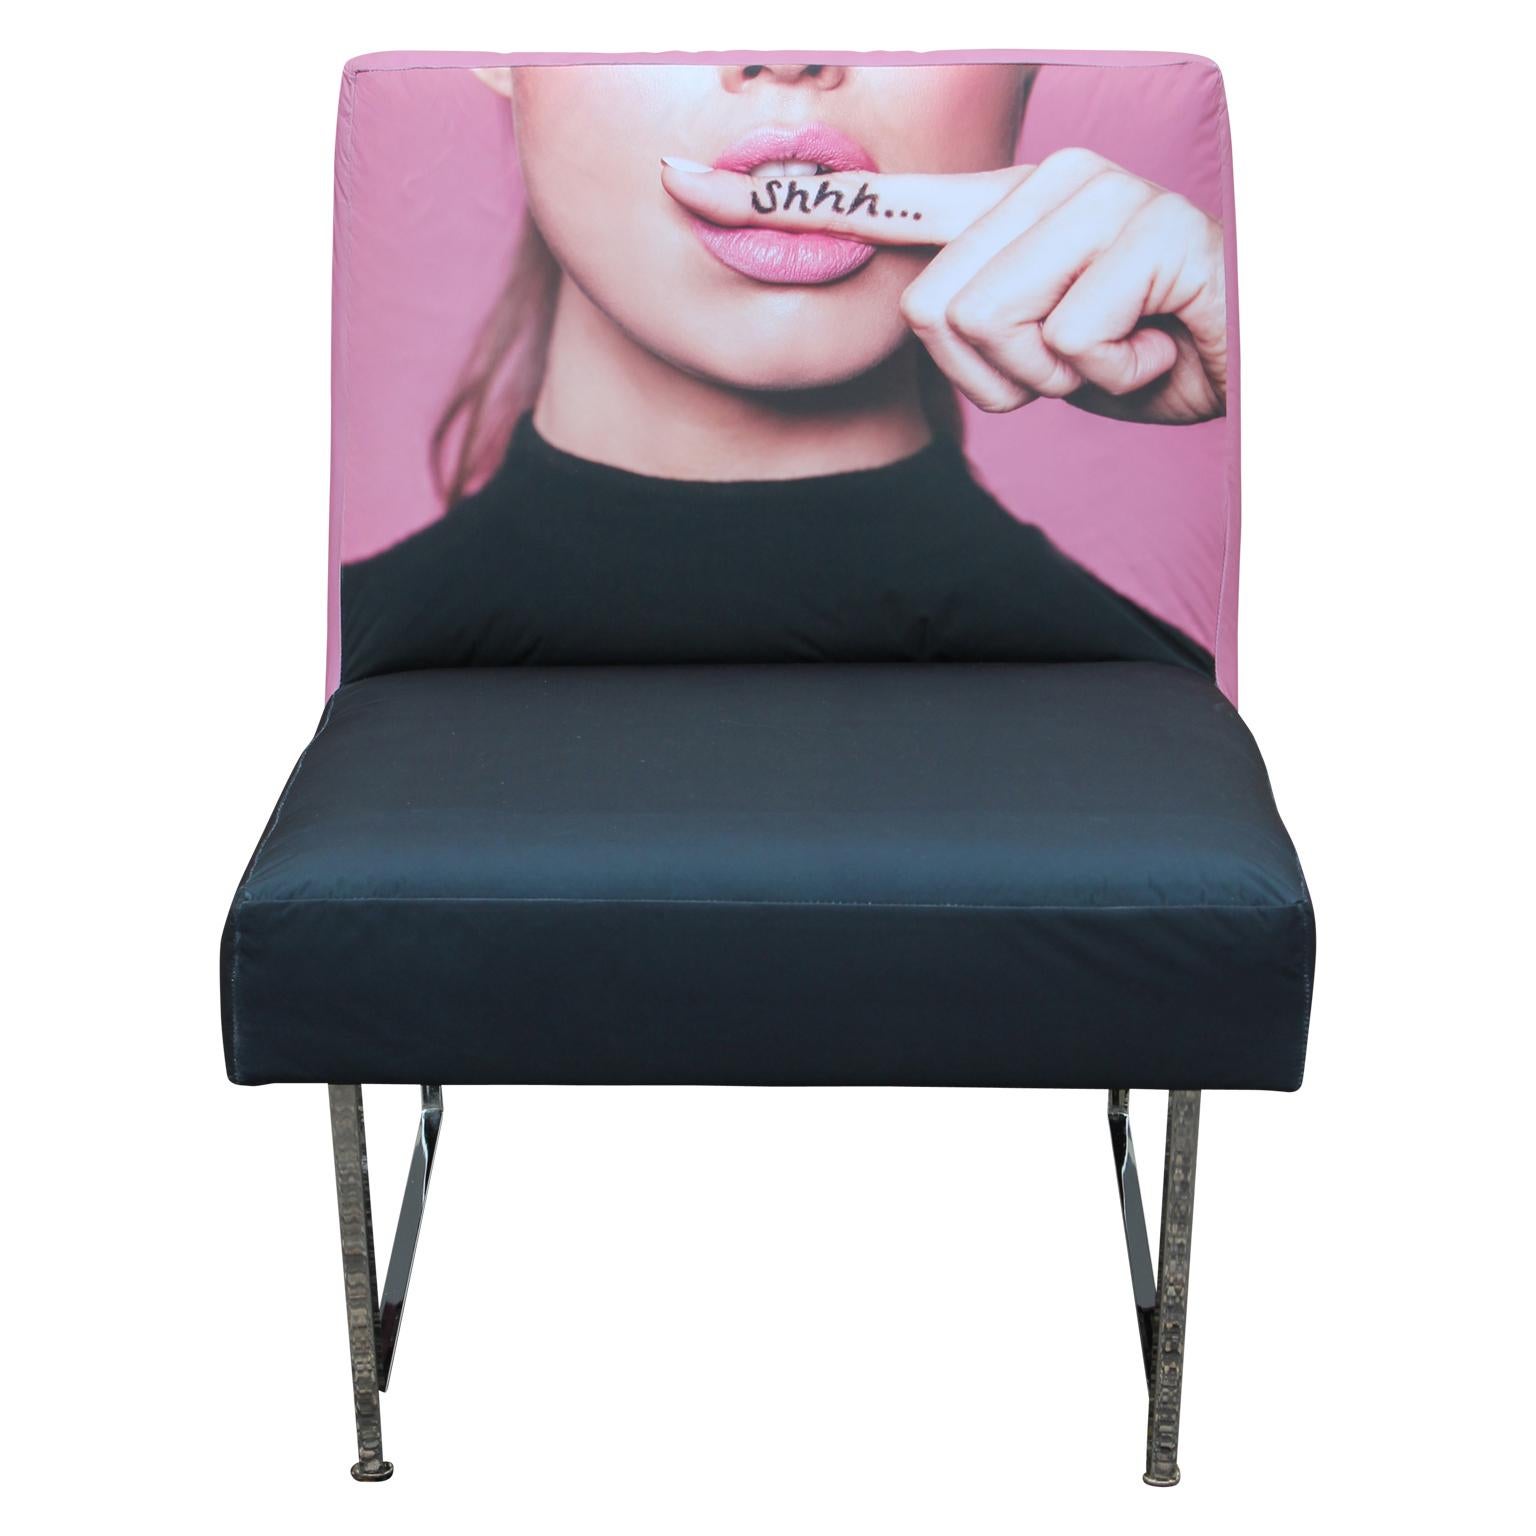 Pair of beautiful custom modern slipper lounge chairs upholstered with a one of a kind printed up-close portrait of a woman's face / chrome base. Fabric is meant to look like a loose slipcover / it intentionally isn't pulled tight.